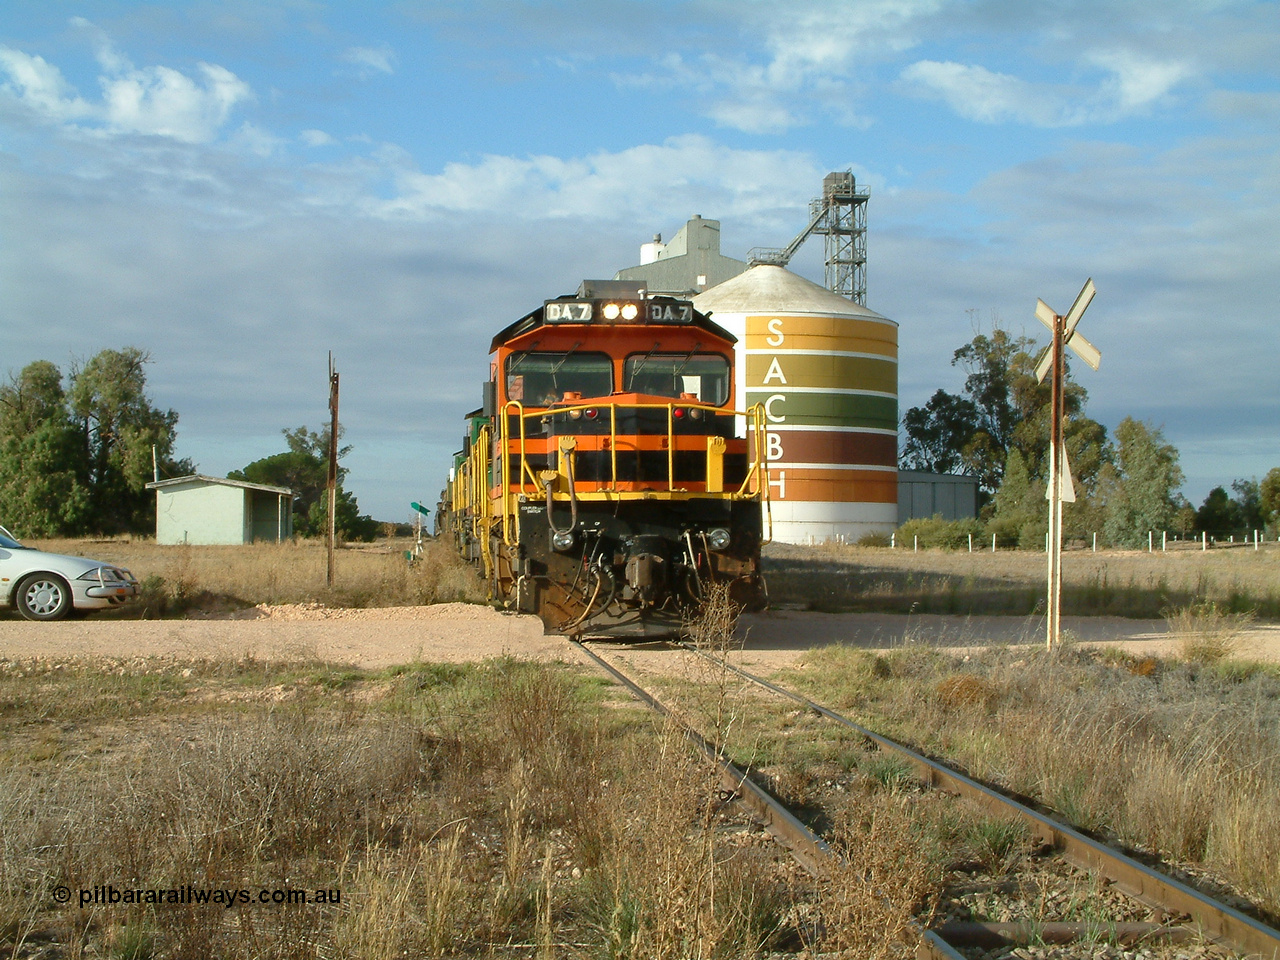 030409 080822
Warramboo, empty grain prepares to get underway following a crew change. Rebuild unit DA 7 in Australian Southern orange and black livery leads a pair of AE Goodwin built ALCo model DL531 830 class units 872 and 871, the relieved crew in the car with the long disused station building on the left and the SACBH concrete silo complex on the right rounding out the scene.
Keywords: DA-class;DA7;83713;Port-Augusta-WS;ALCo;DL531G/1;48-class;4813;rebuild;